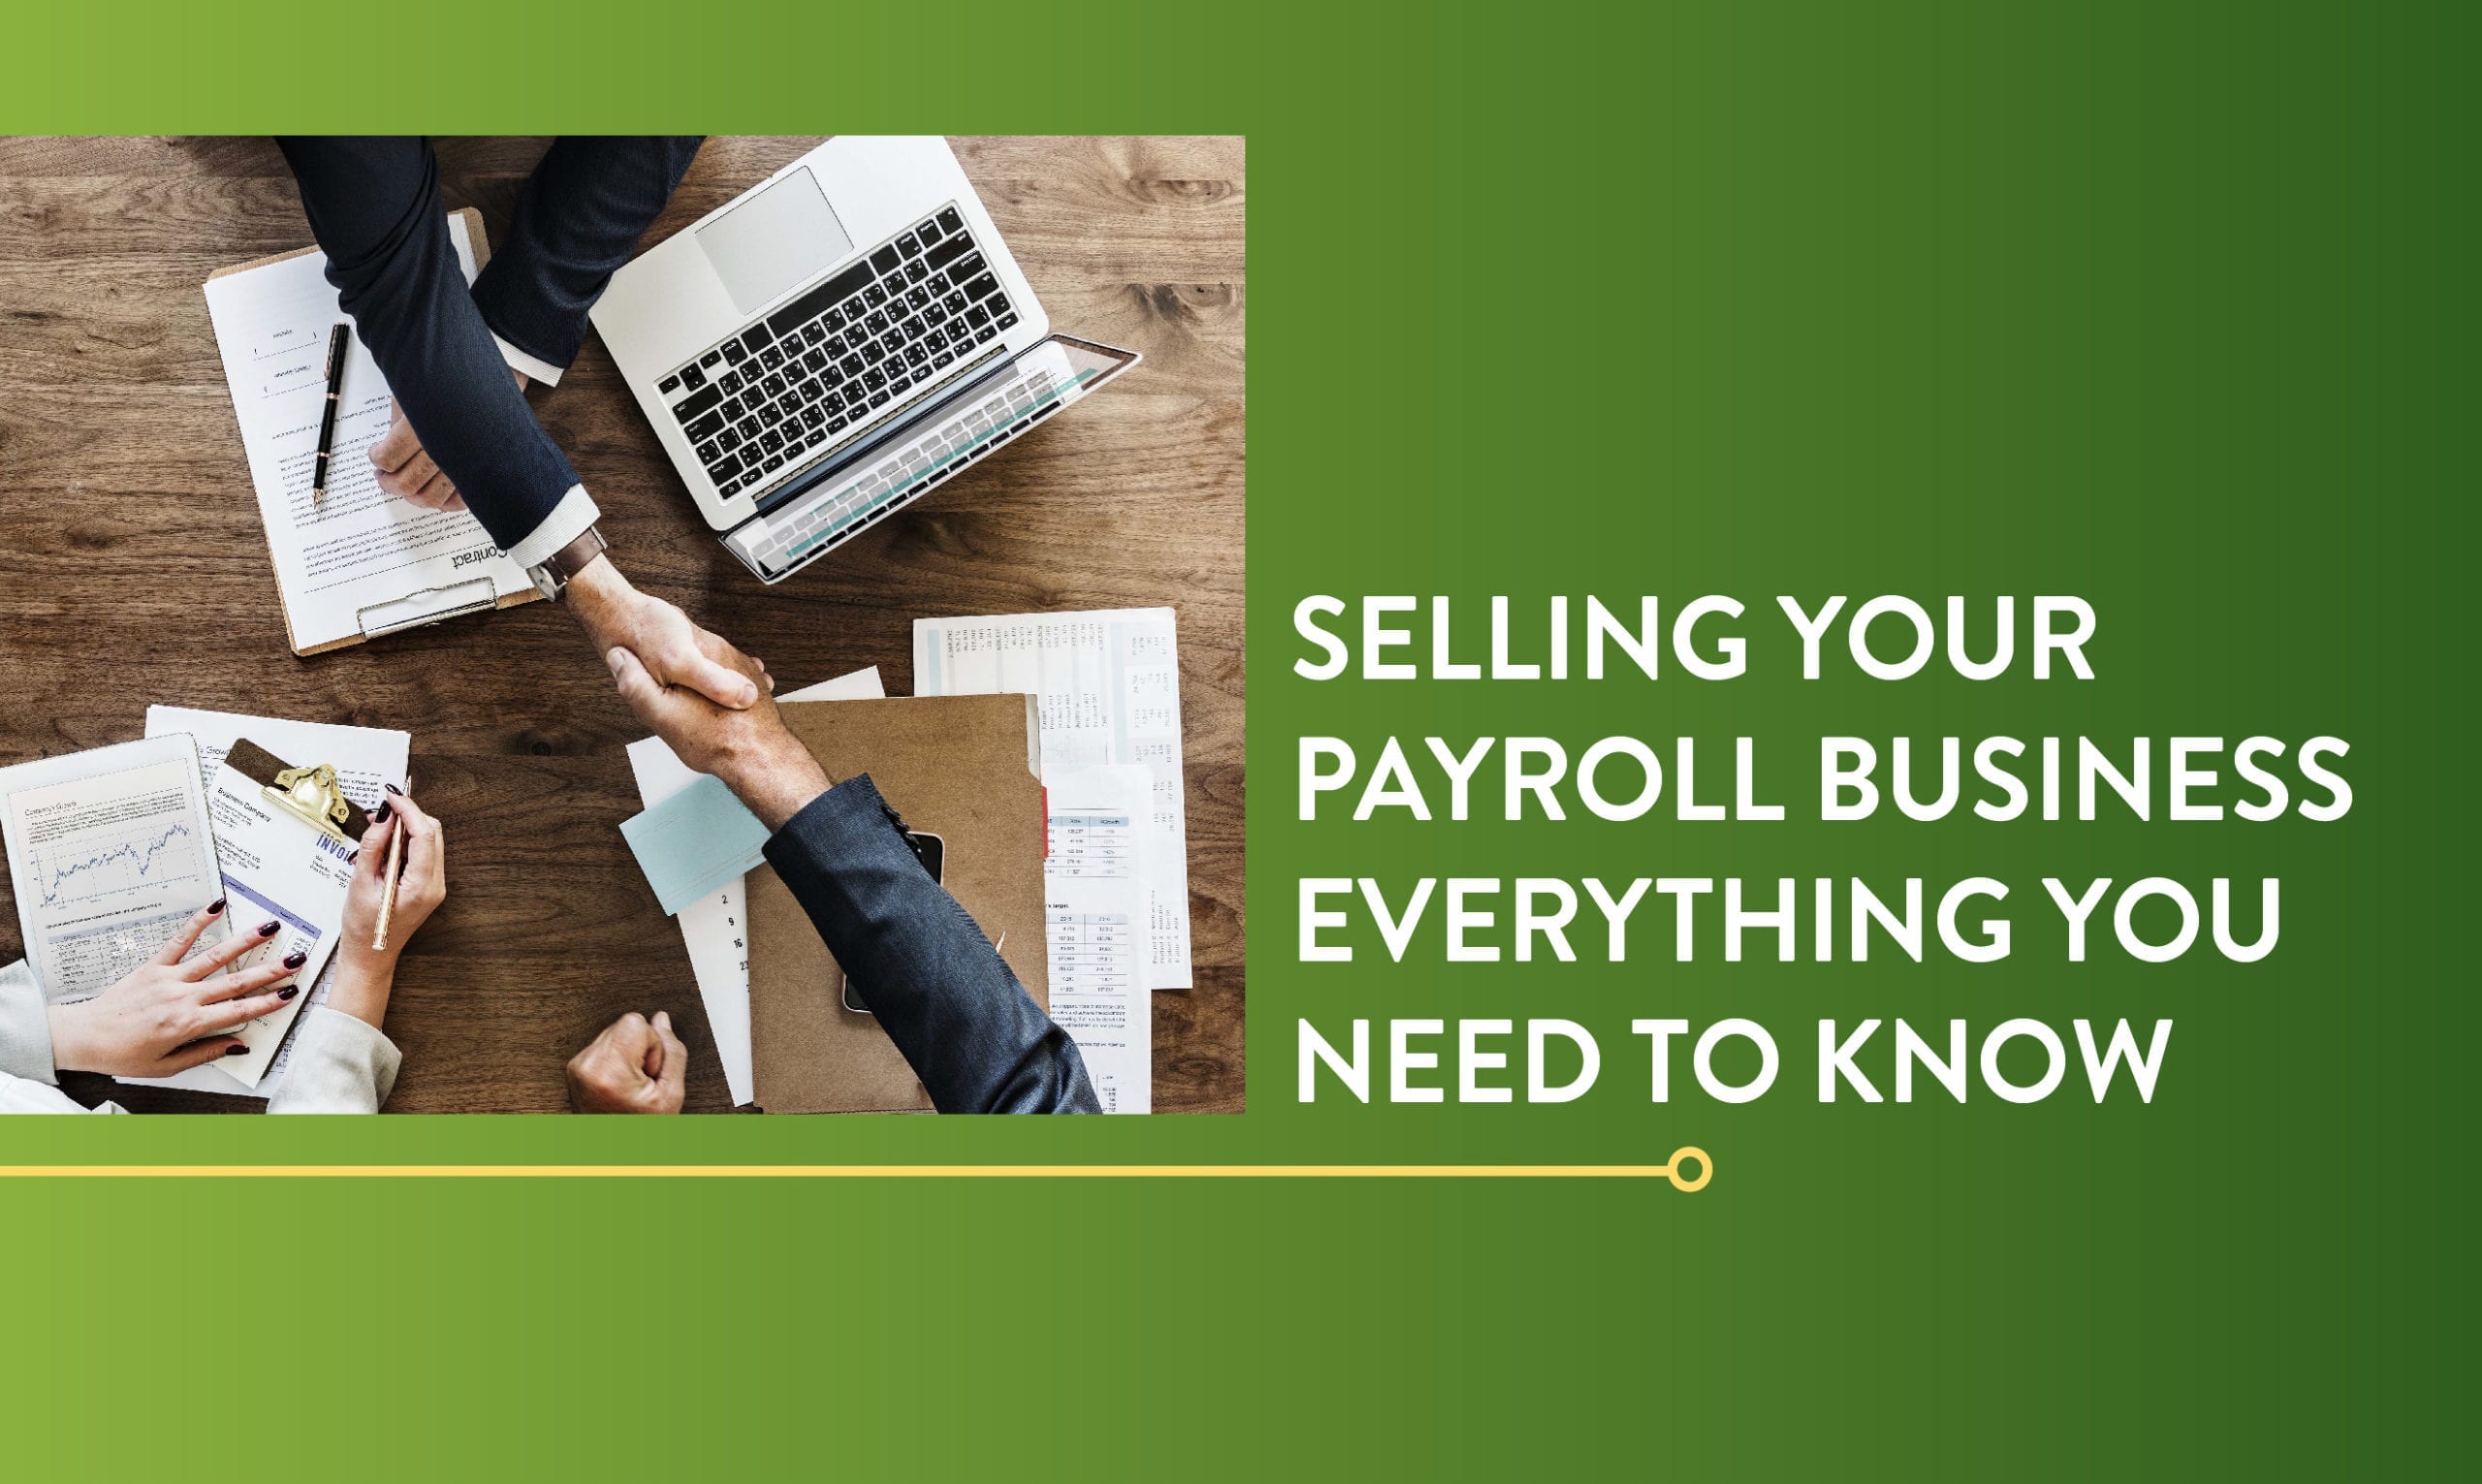 Sell Your Payroll Business Tips